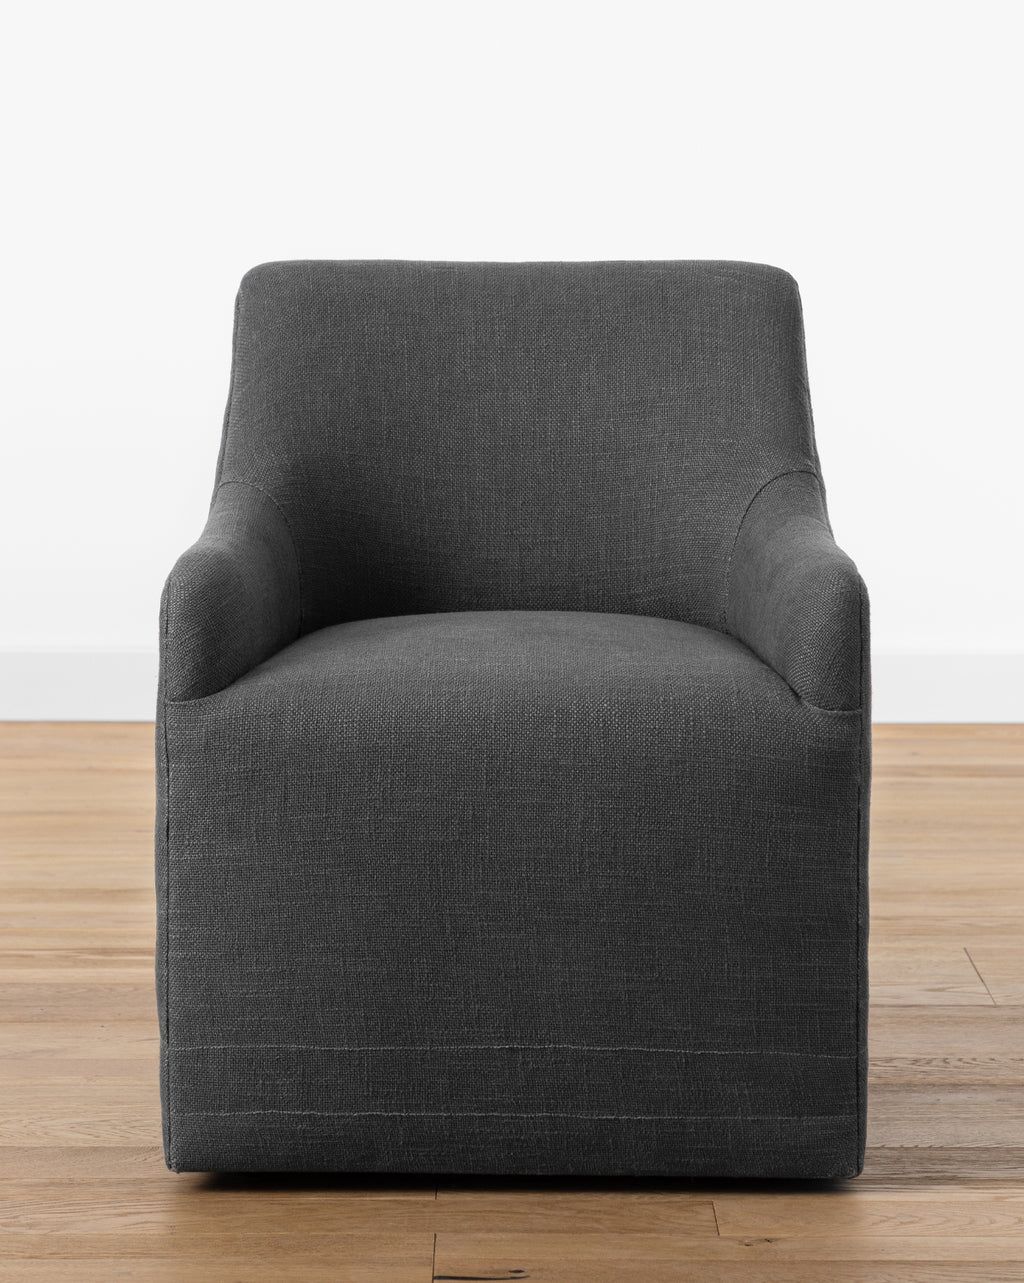 Elton Office Chair | McGee & Co.